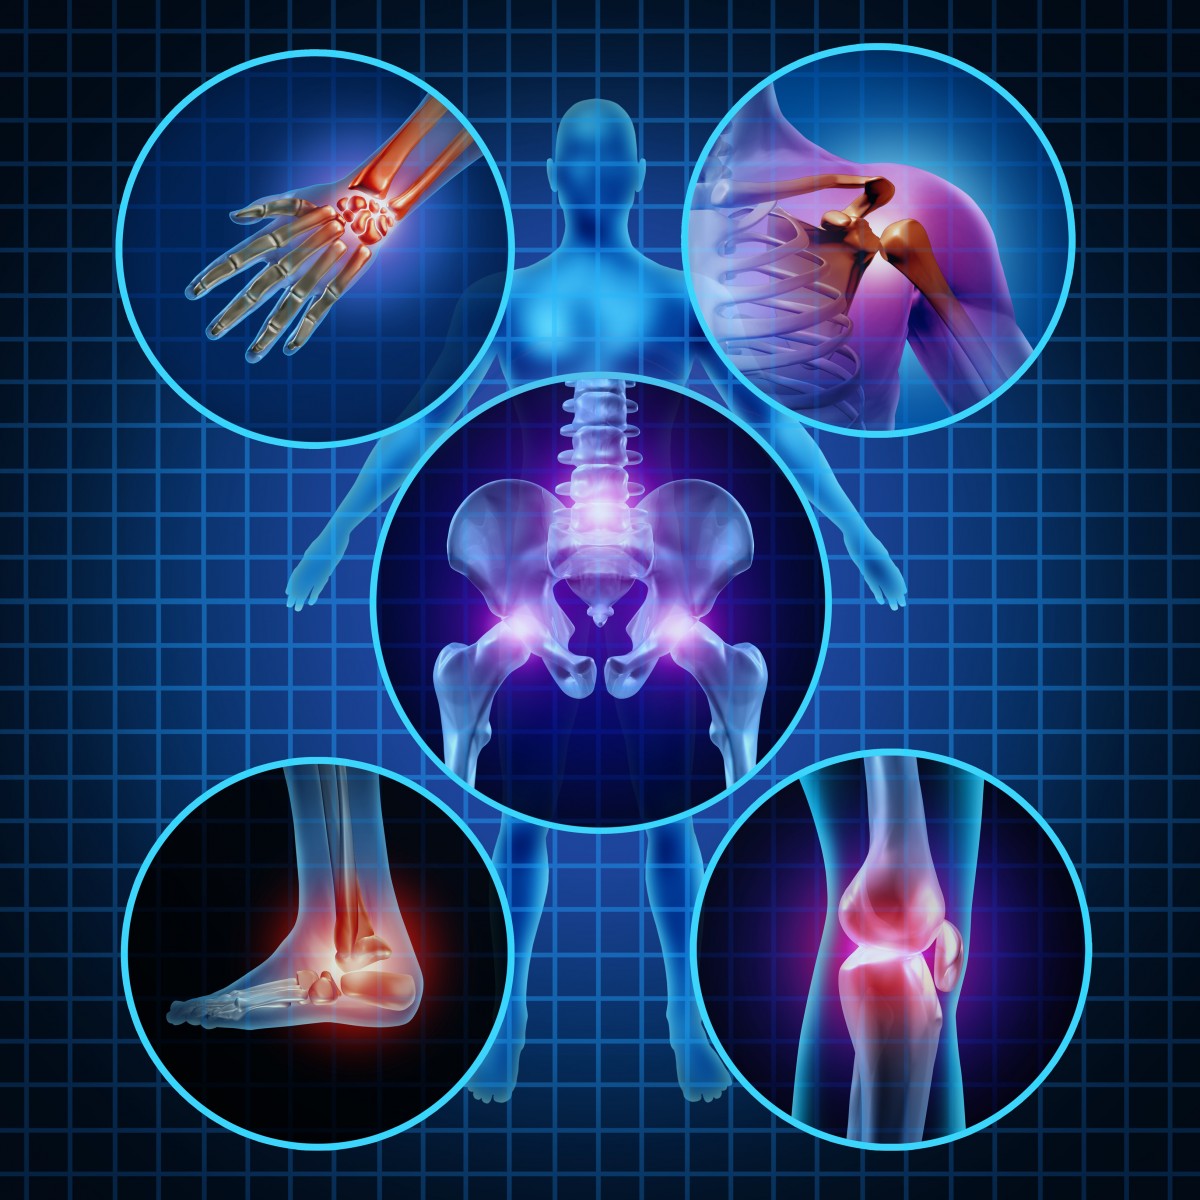 What Allows Remission in Patients with Early Rheumatoid Arthritis?